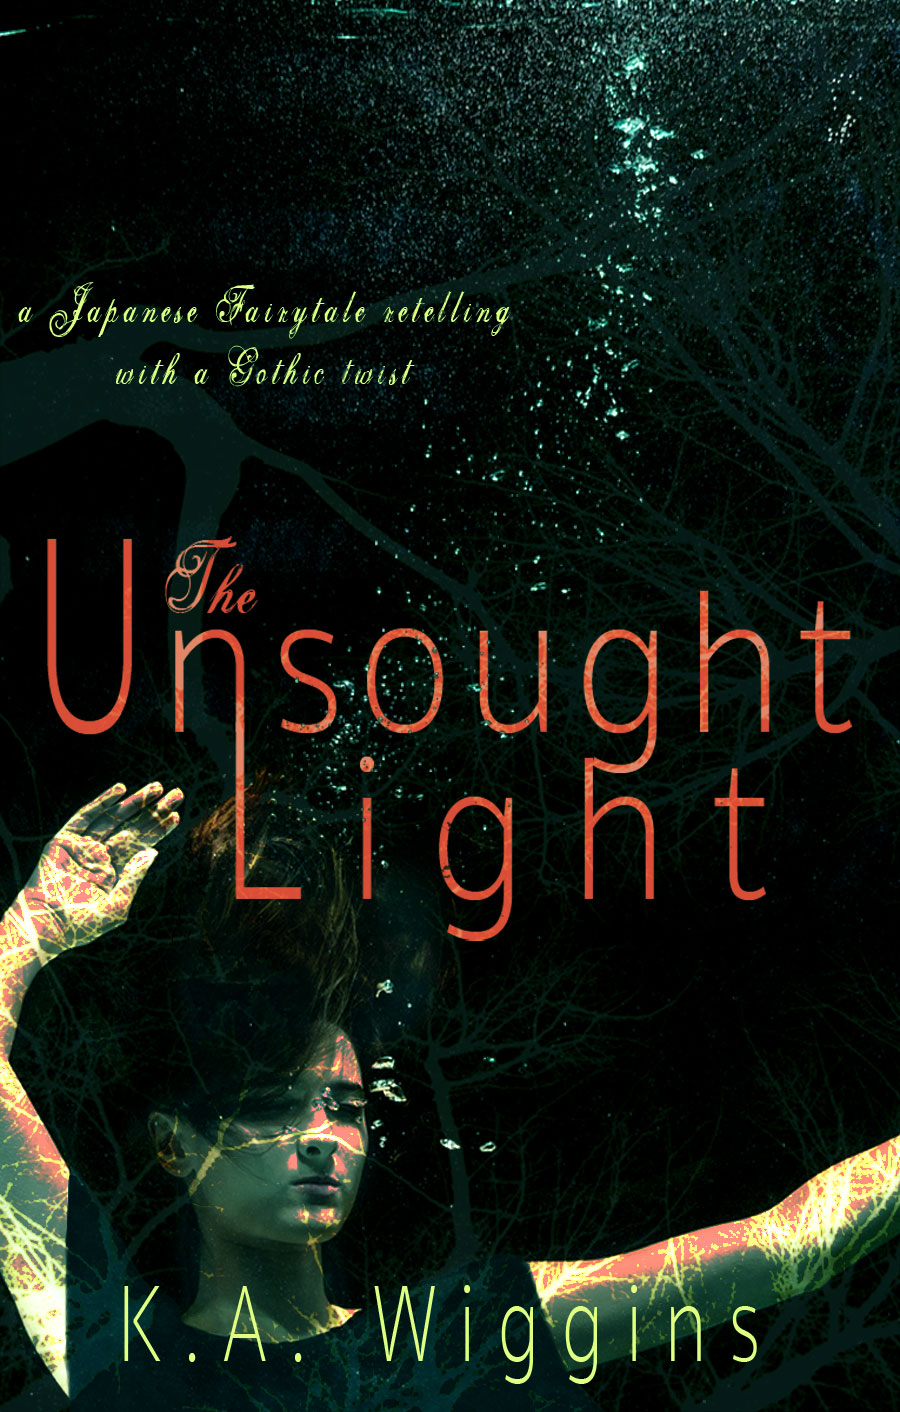 short story The Unsought Light ebook cover by K.A. Wiggins